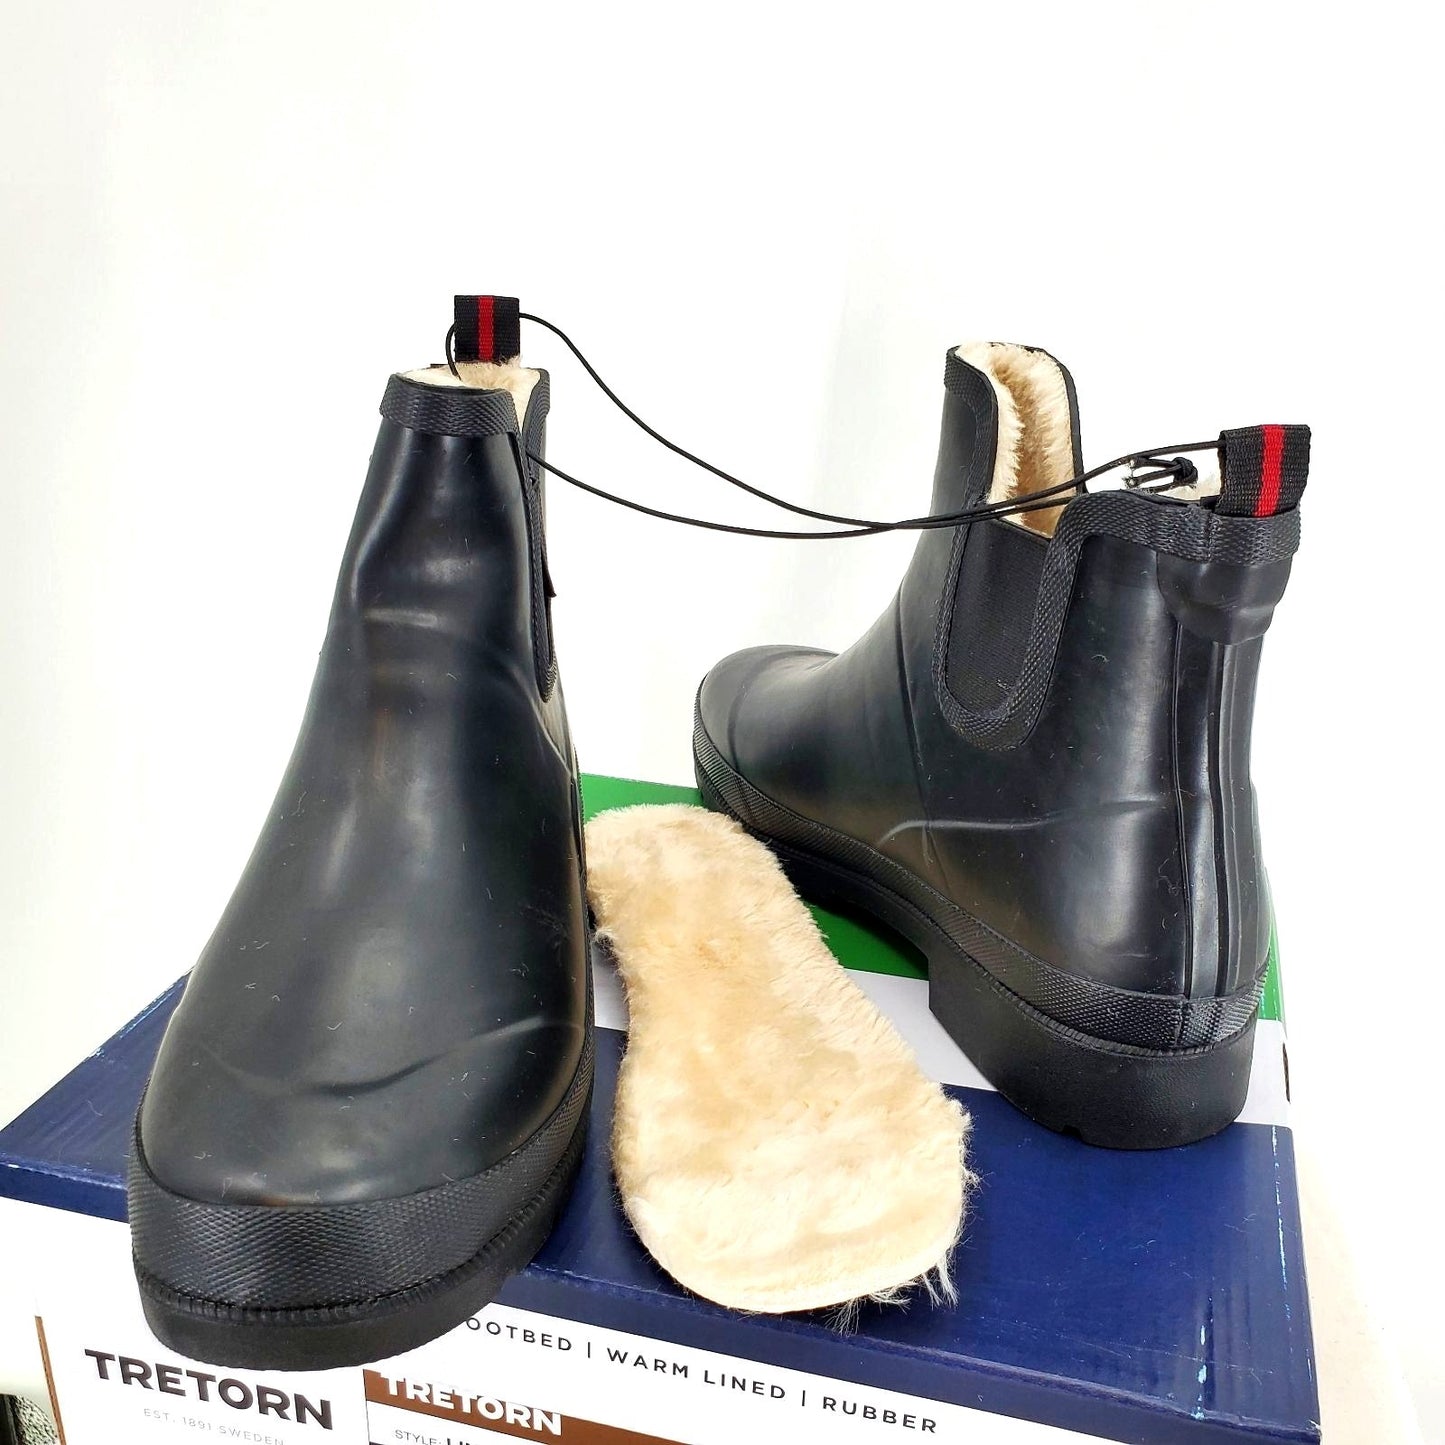 TRETORN Boots LINA Outdoor Faux Fur Lined Chelsea Rain shoes Booties